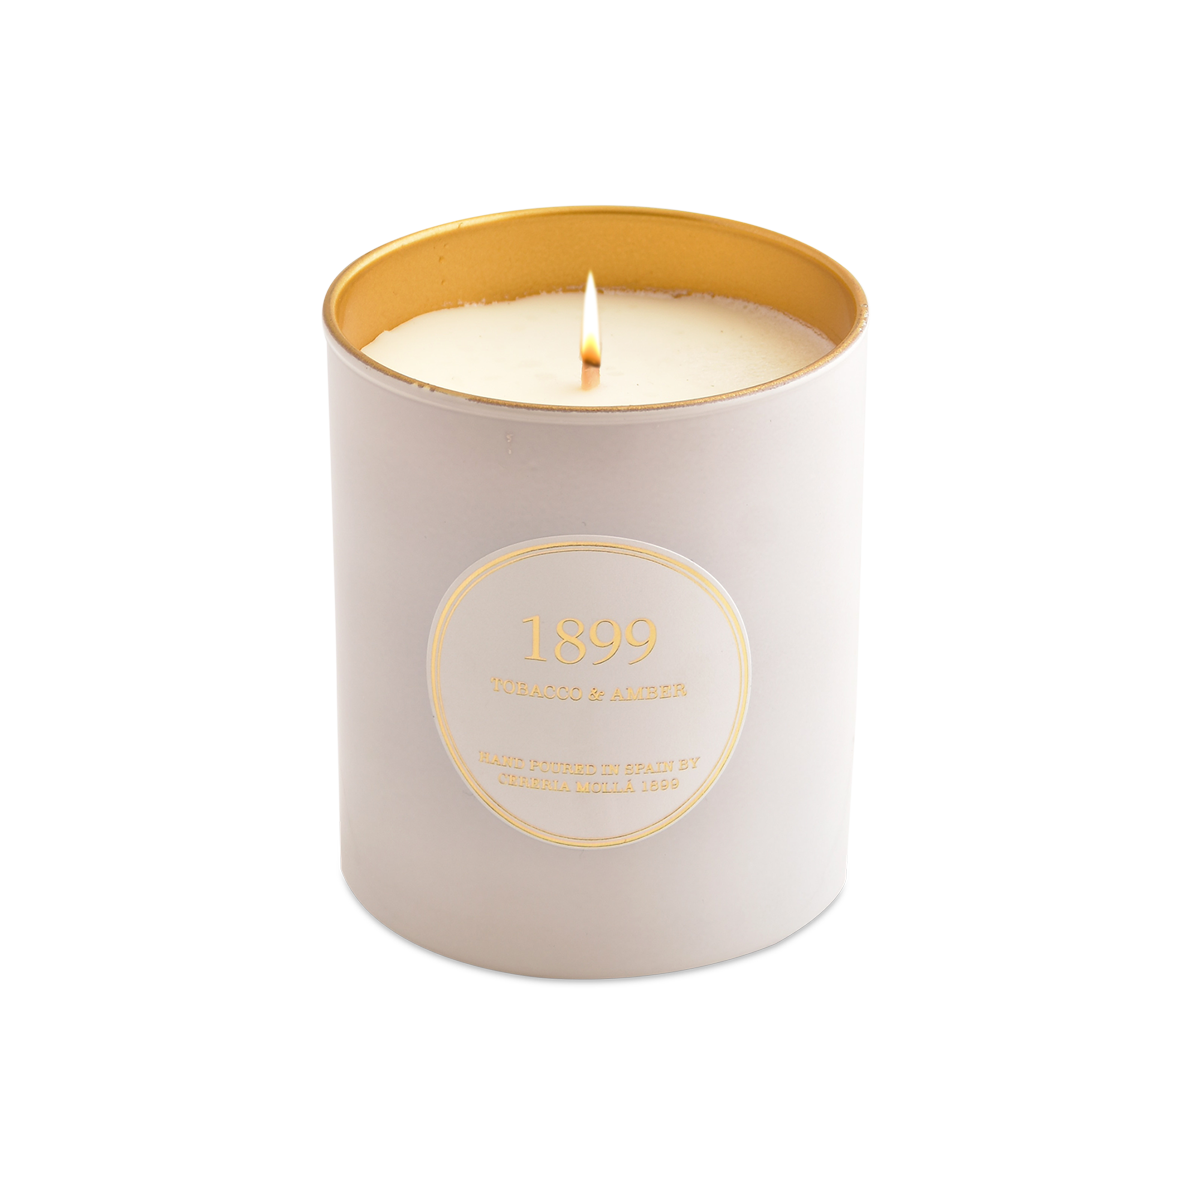 Tobacco & Amber Scented Candle